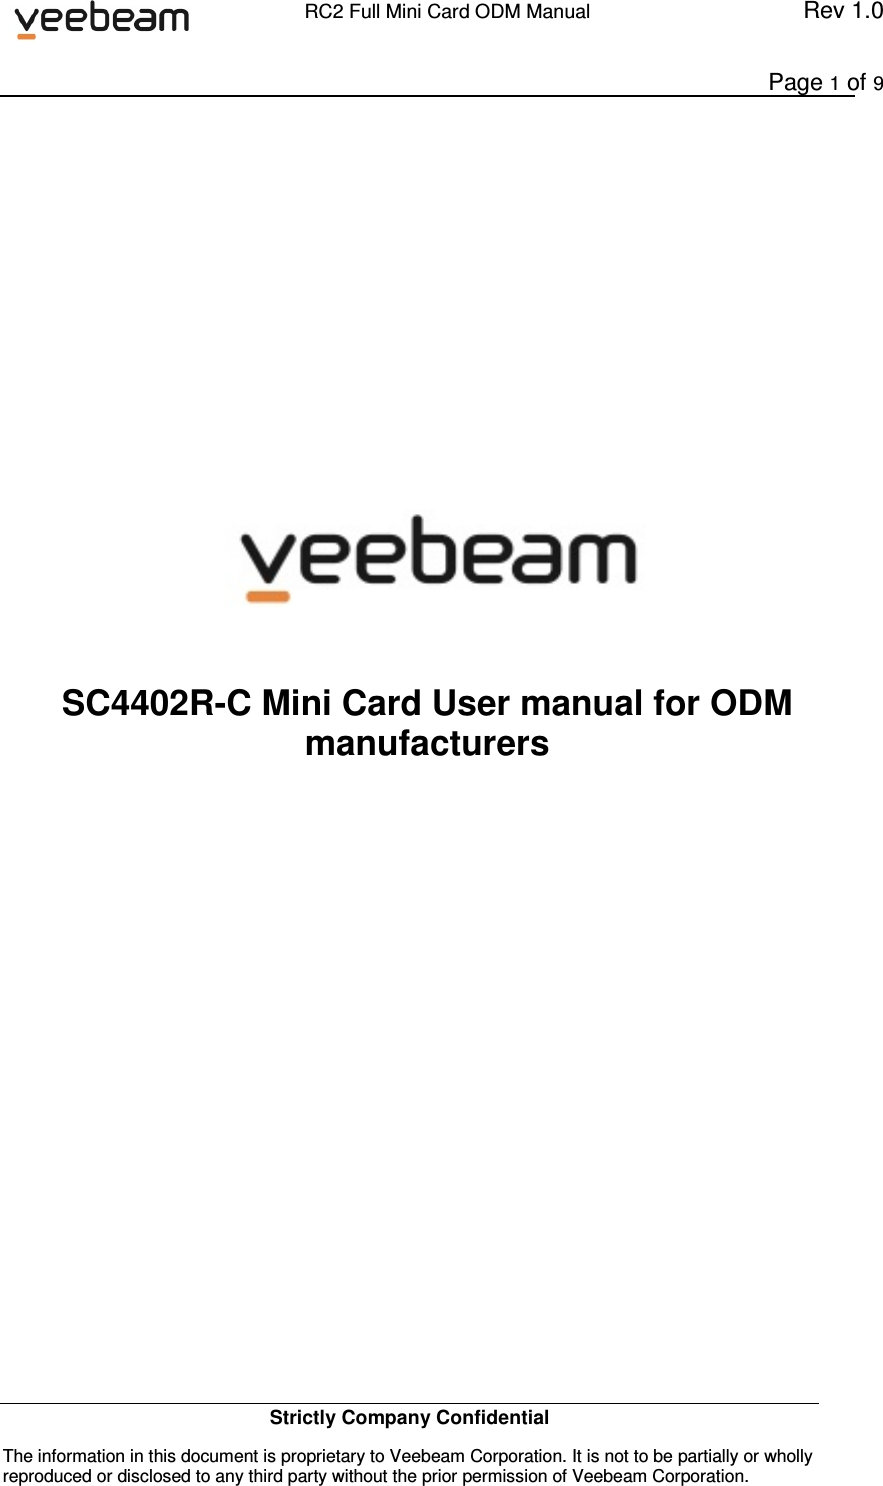             RC2 Full Mini Card ODM Manual  Rev 1.0      Page 1 of 9 Strictly Company Confidential The information in this document is proprietary to Veebeam Corporation. It is not to be partially or wholly reproduced or disclosed to any third party without the prior permission of Veebeam Corporation.                 SC4402R-C Mini Card User manual for ODM manufacturers             